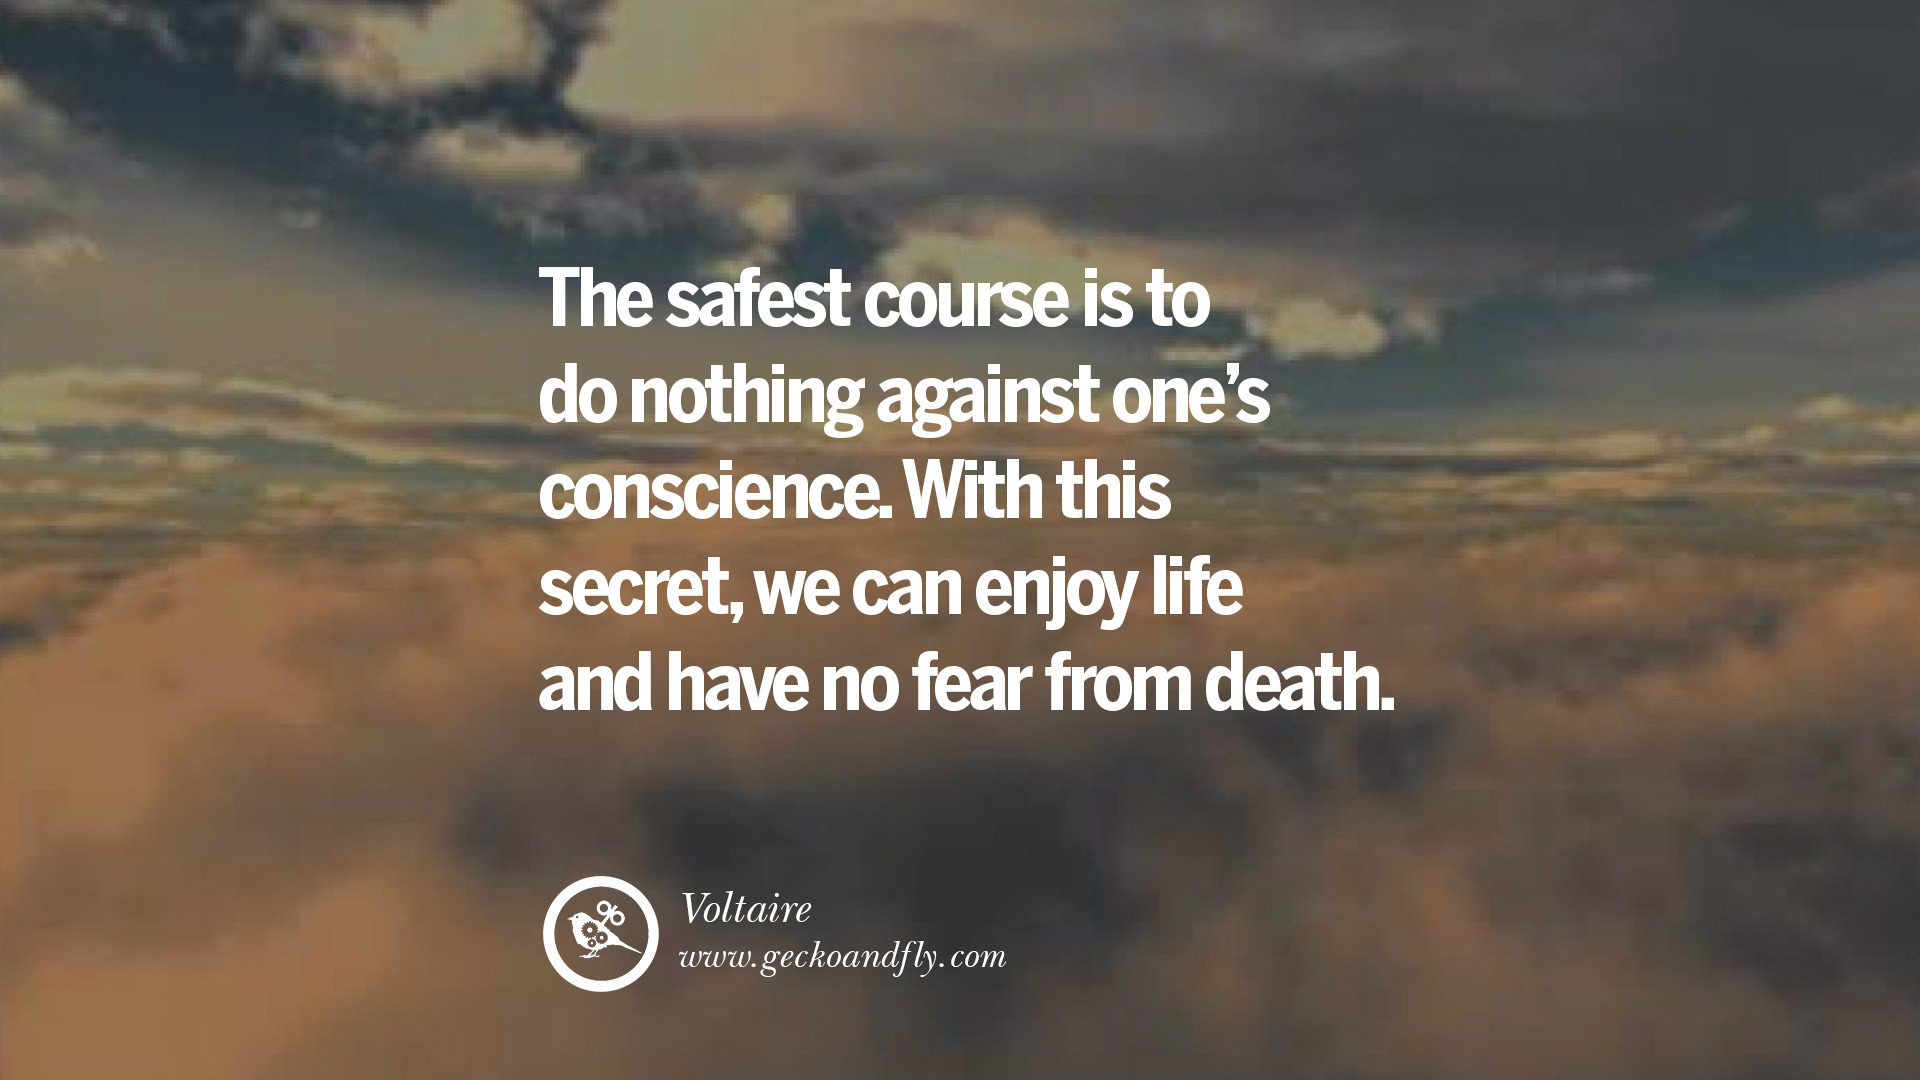 Inspirational Quotes On Death
 Inspirational Quotes About Life And Death QuotesGram